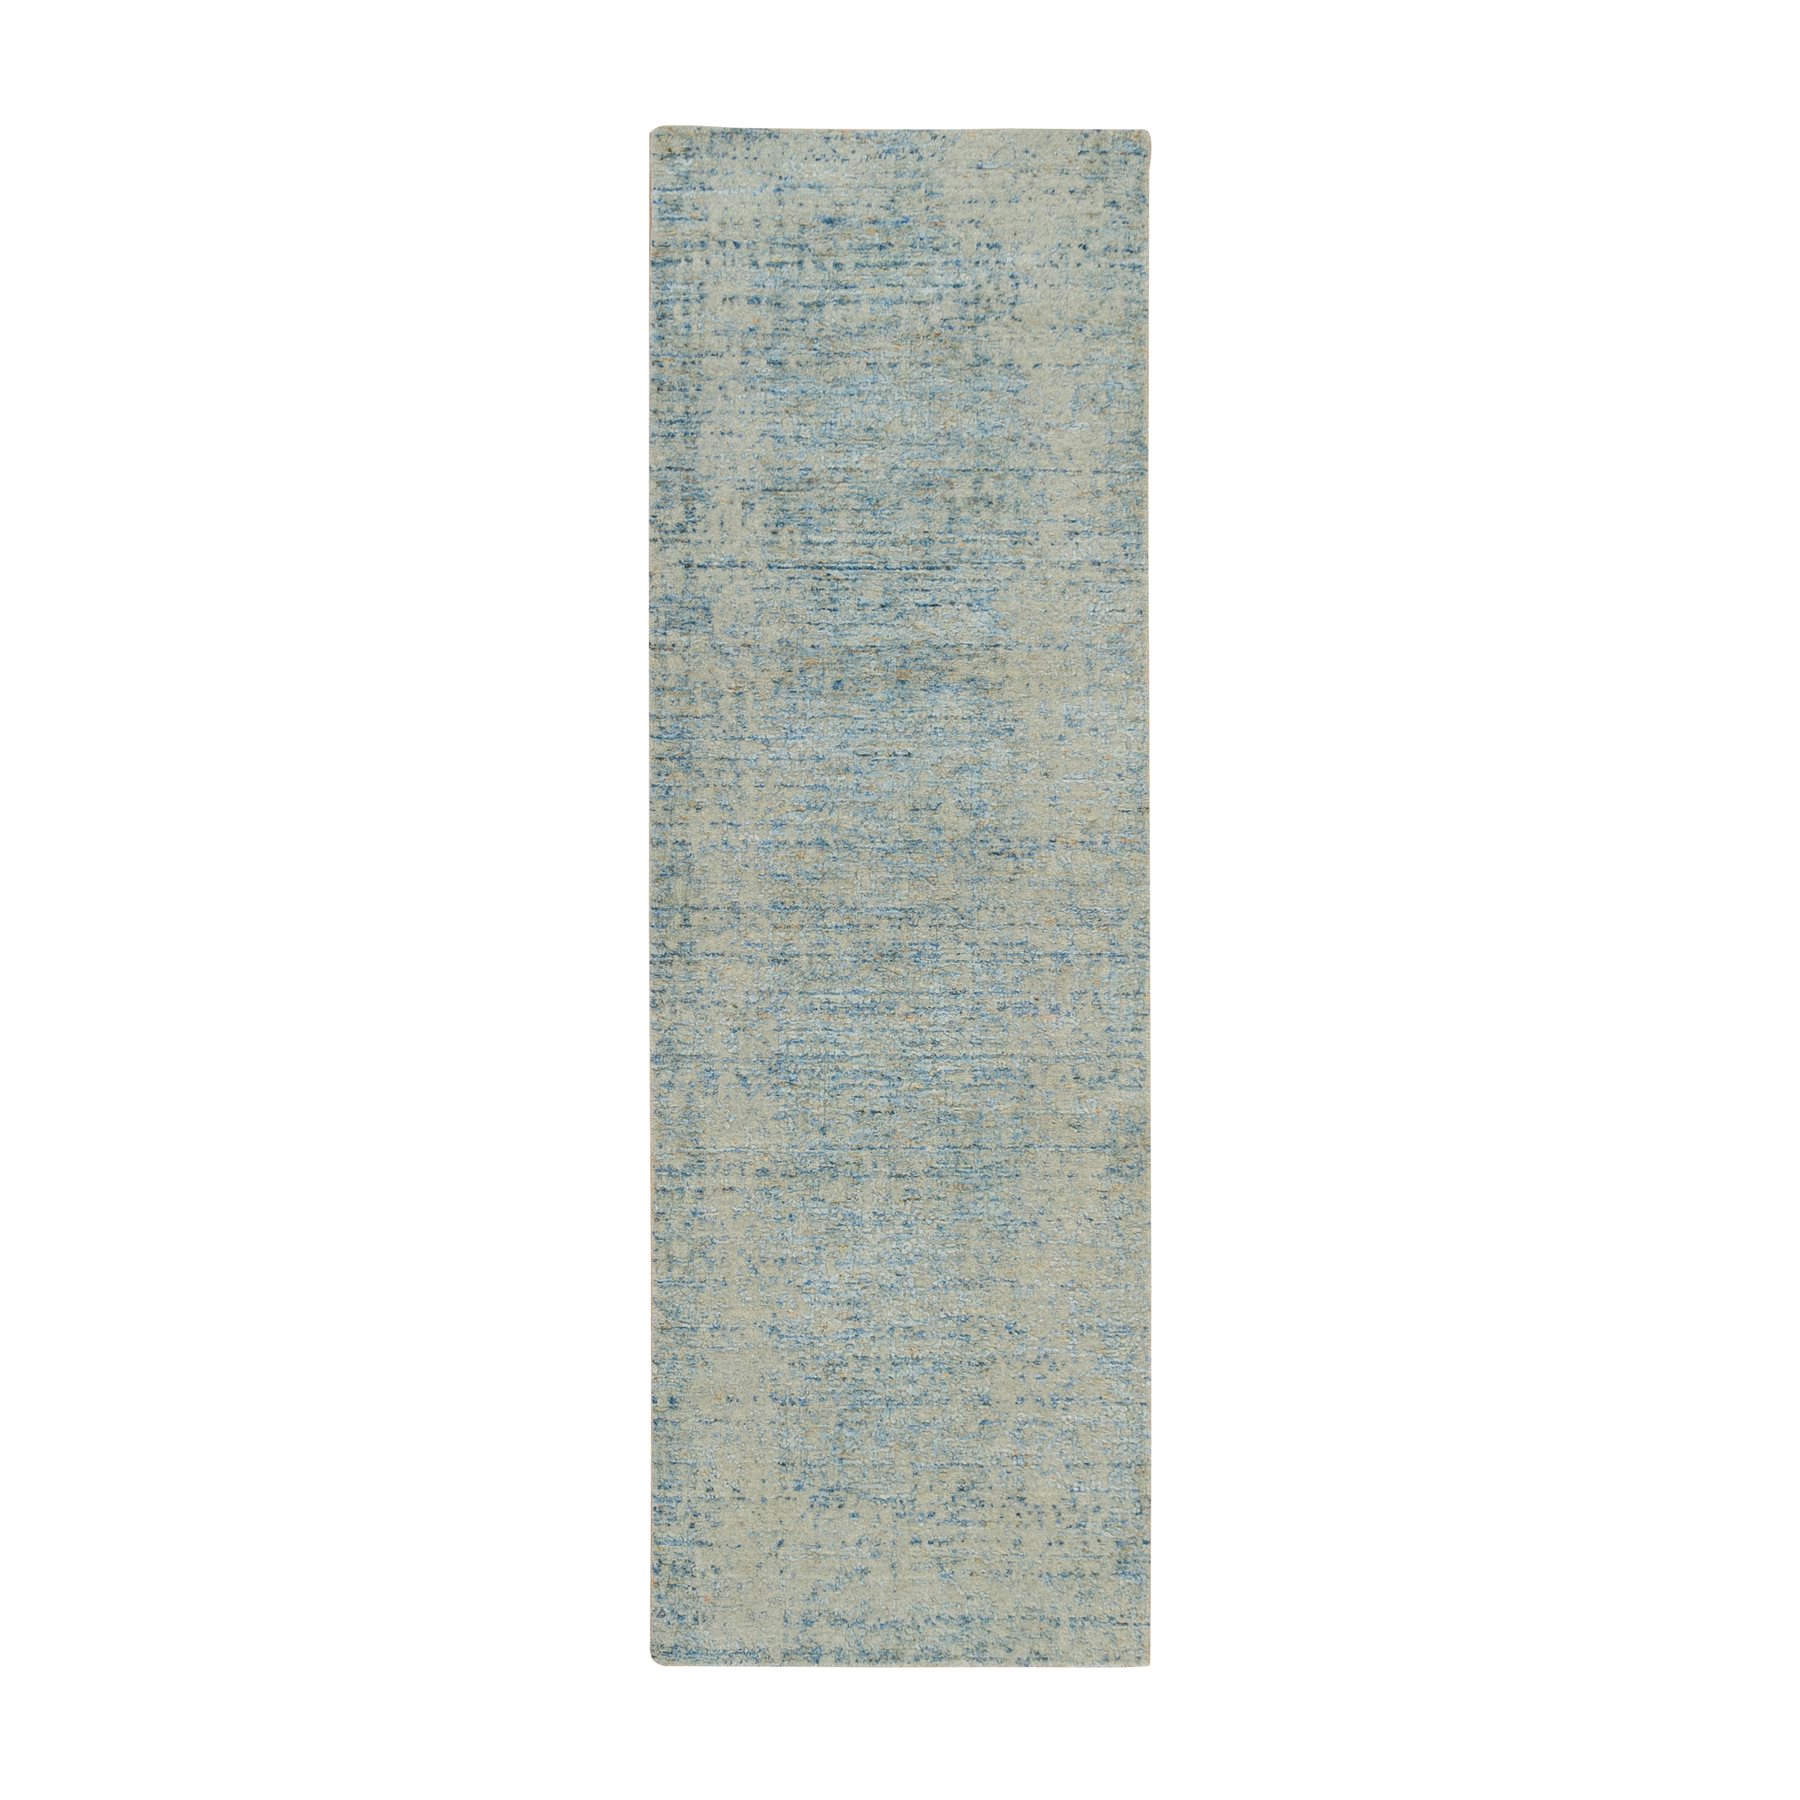 Gray with Touches of Blue, Modern Jacquard Hand Loomed, Soft to the Touch Wool and Plant Based Silk, Runner Oriental Rug